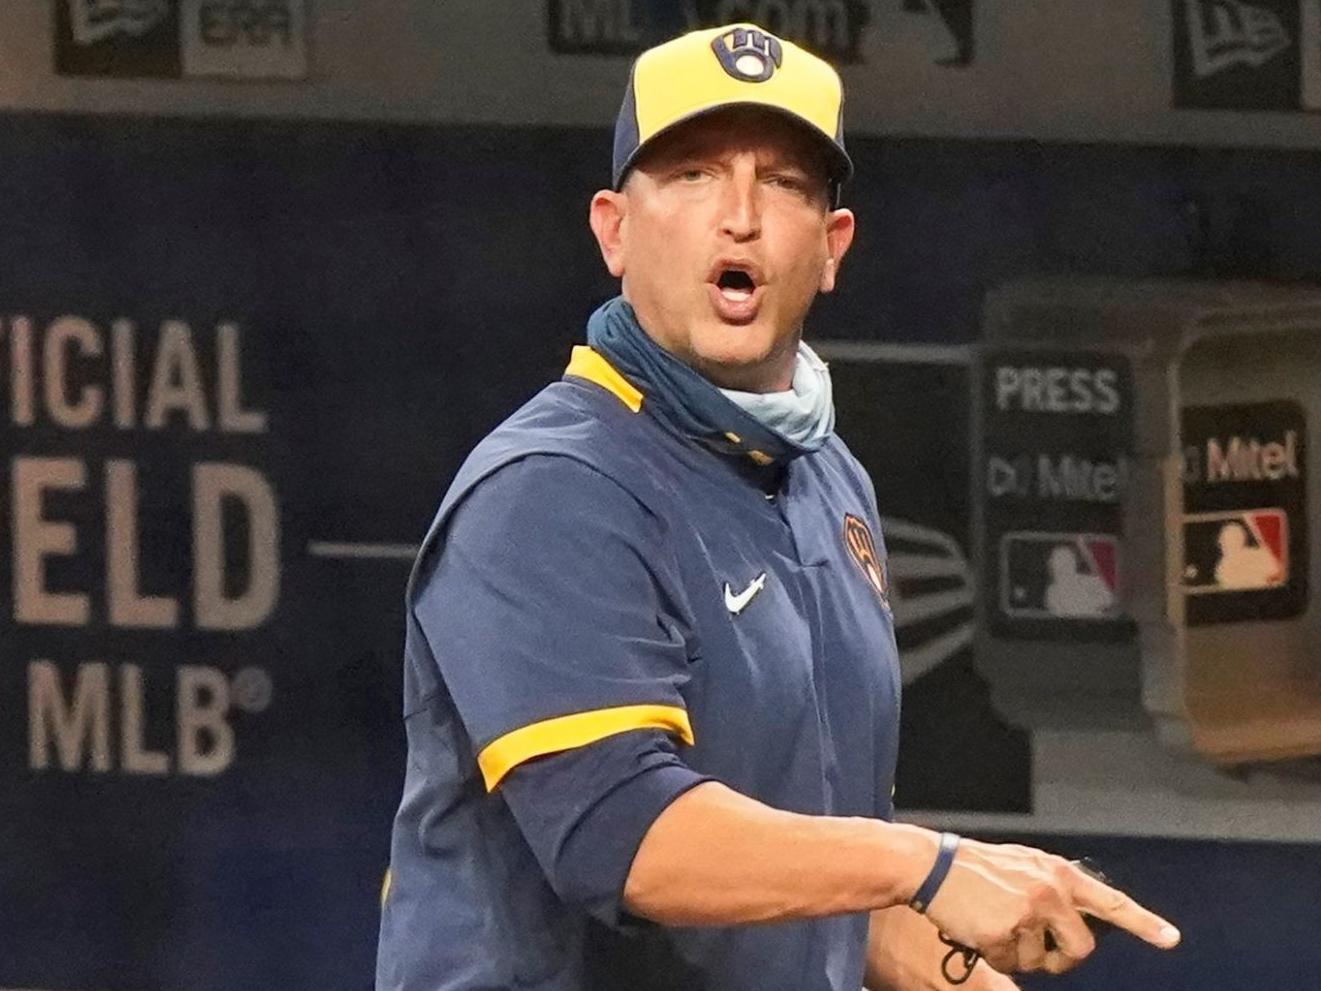 Brewers hitting coach Andy Haines ready to work with clean slate | Major  League Baseball | madison.com